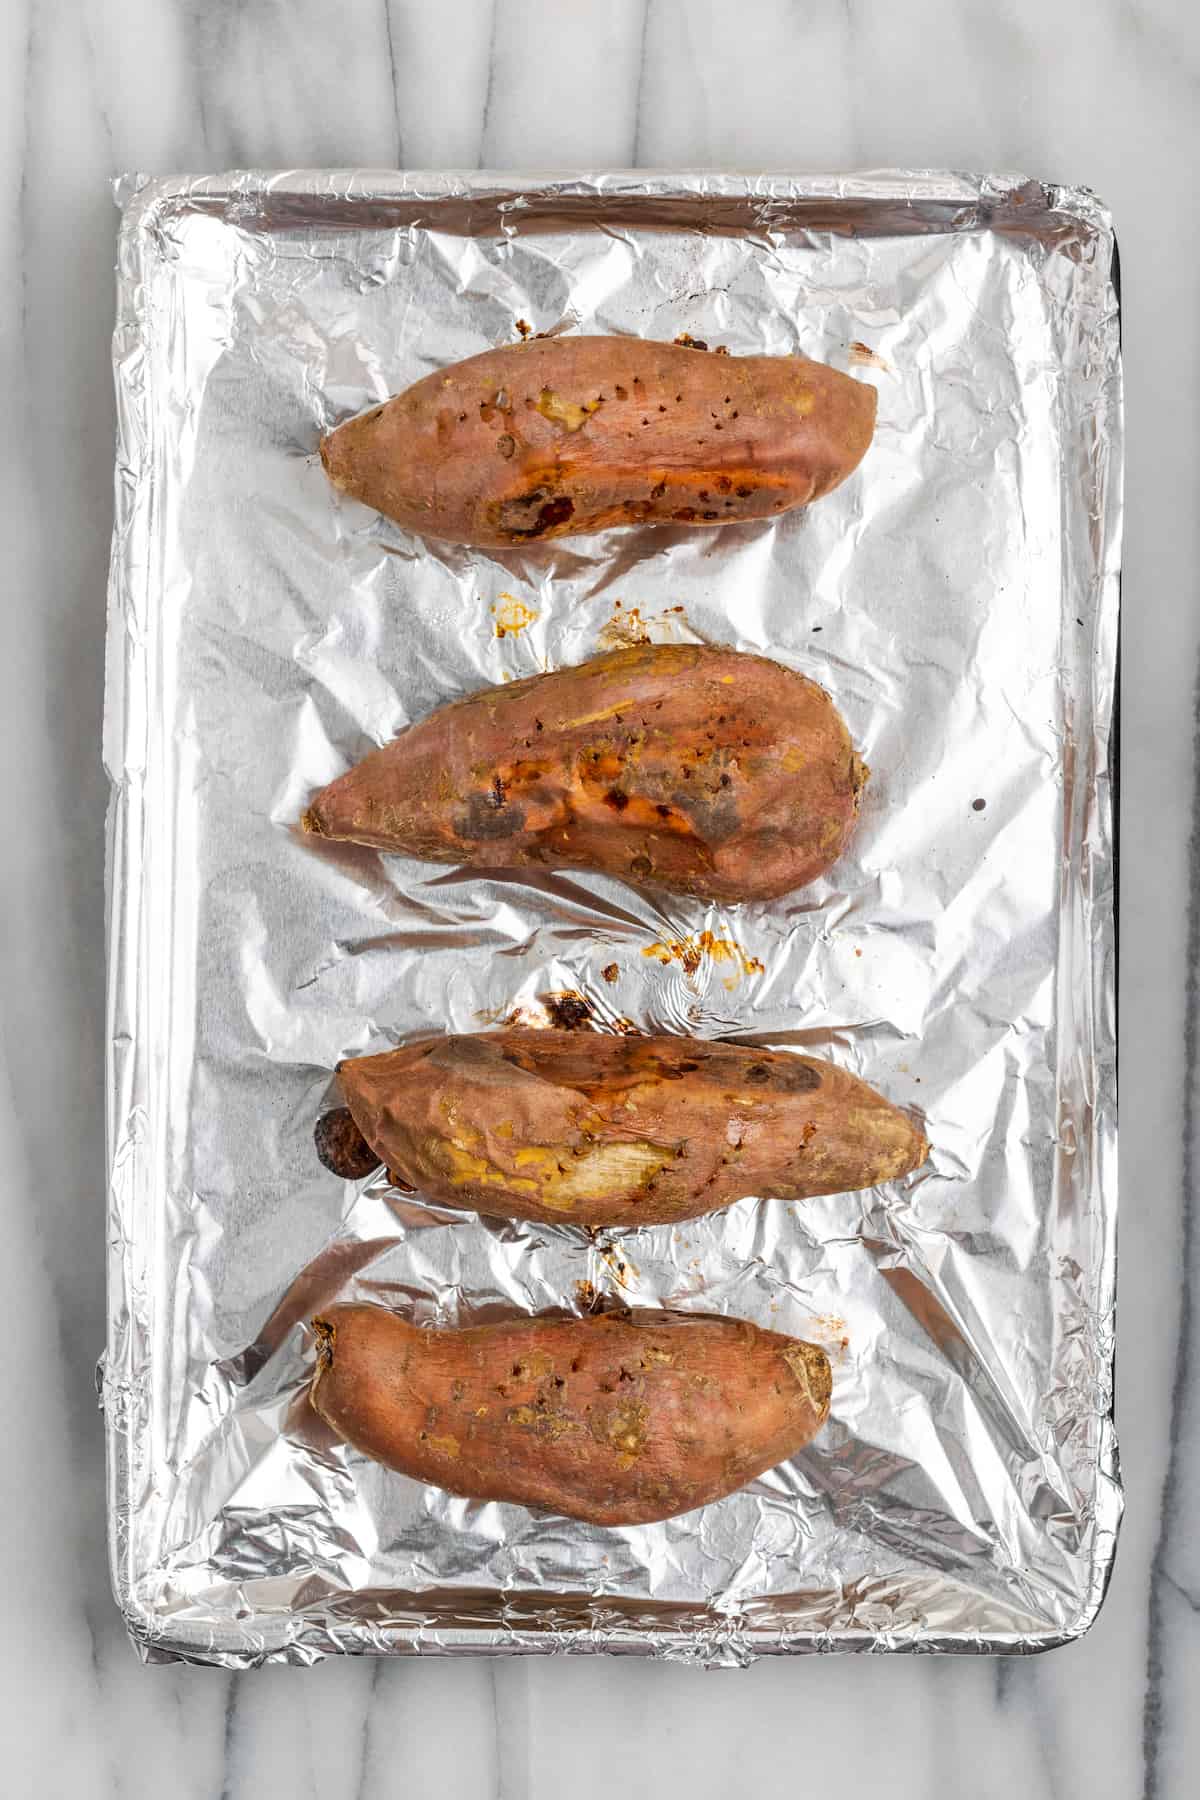 Four cooked sweet potatoes on an aluminum foil-lined baking sheet